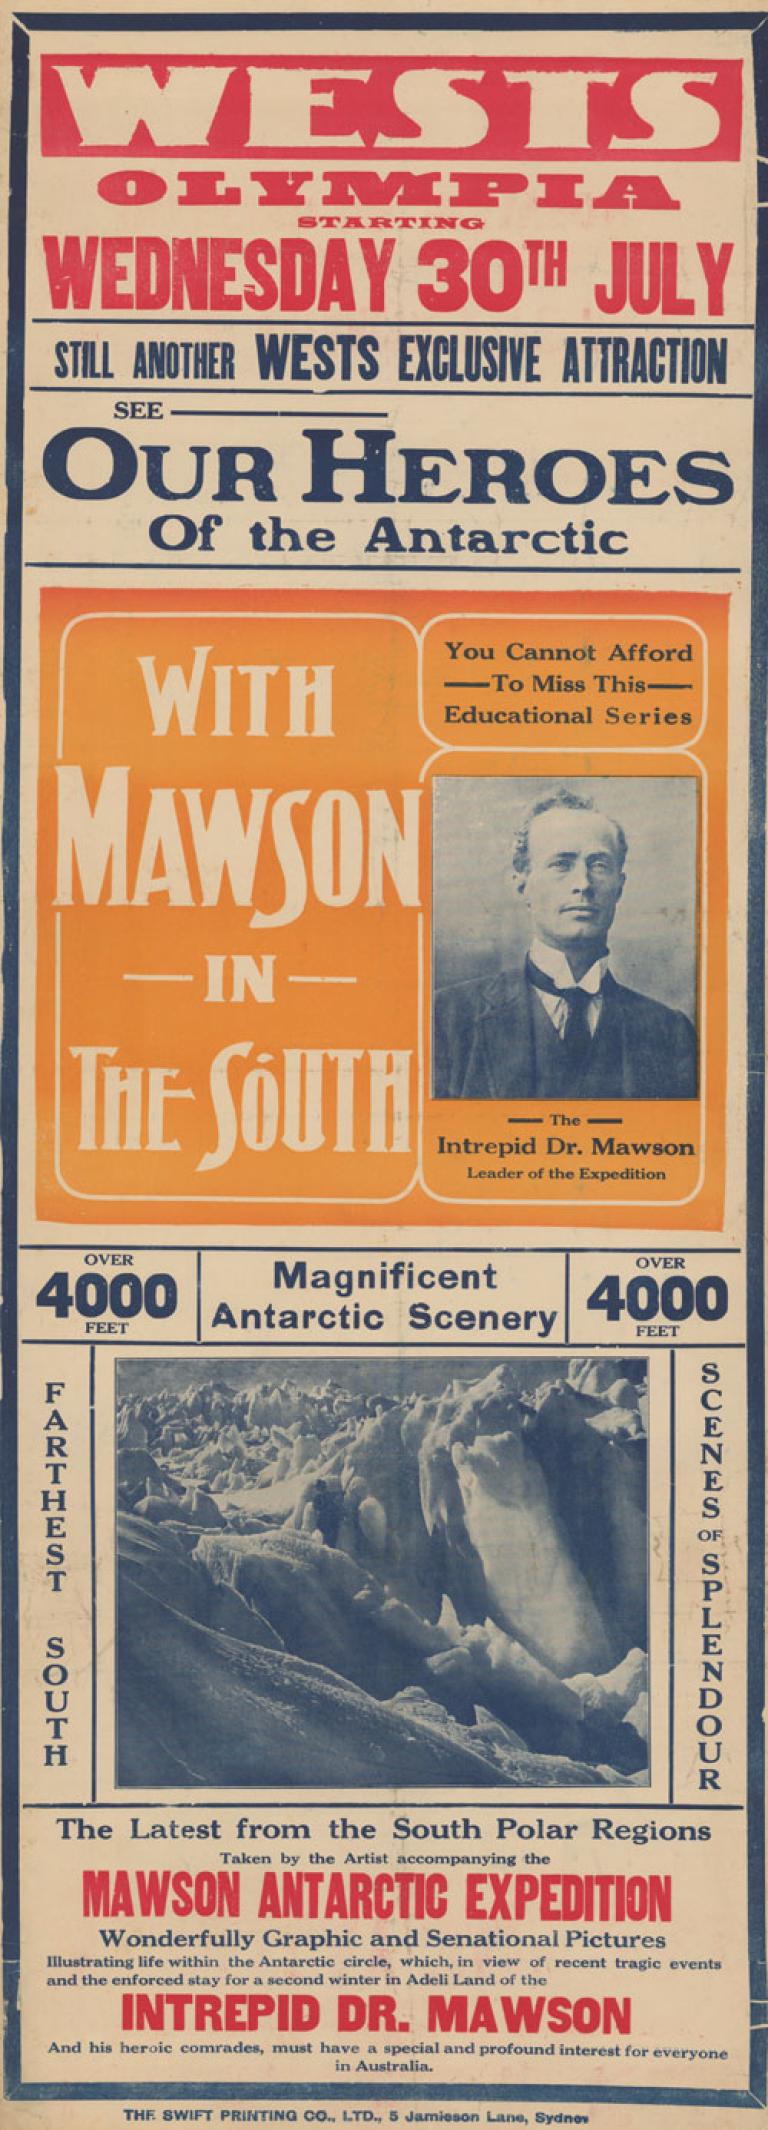 Poster for 'With Mawson in the South'. Shows dates and location of the event with photos of Douglas Mawson and Antarctica 